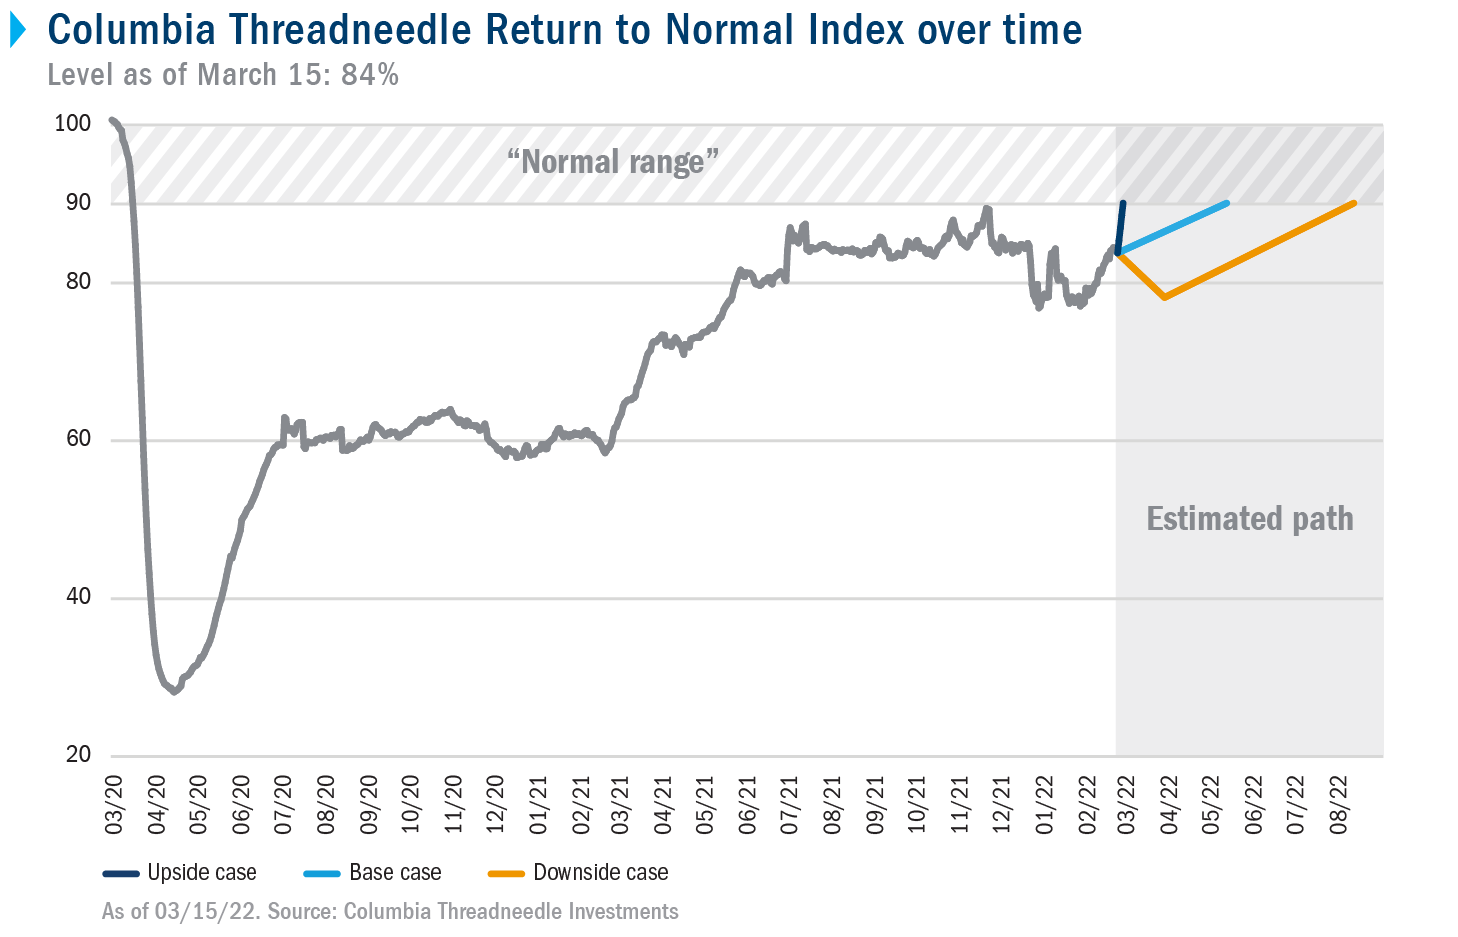 Line chart showing the level of Return to Normal activity over time, with an estimated downside case of returning to normal range in February 2022.